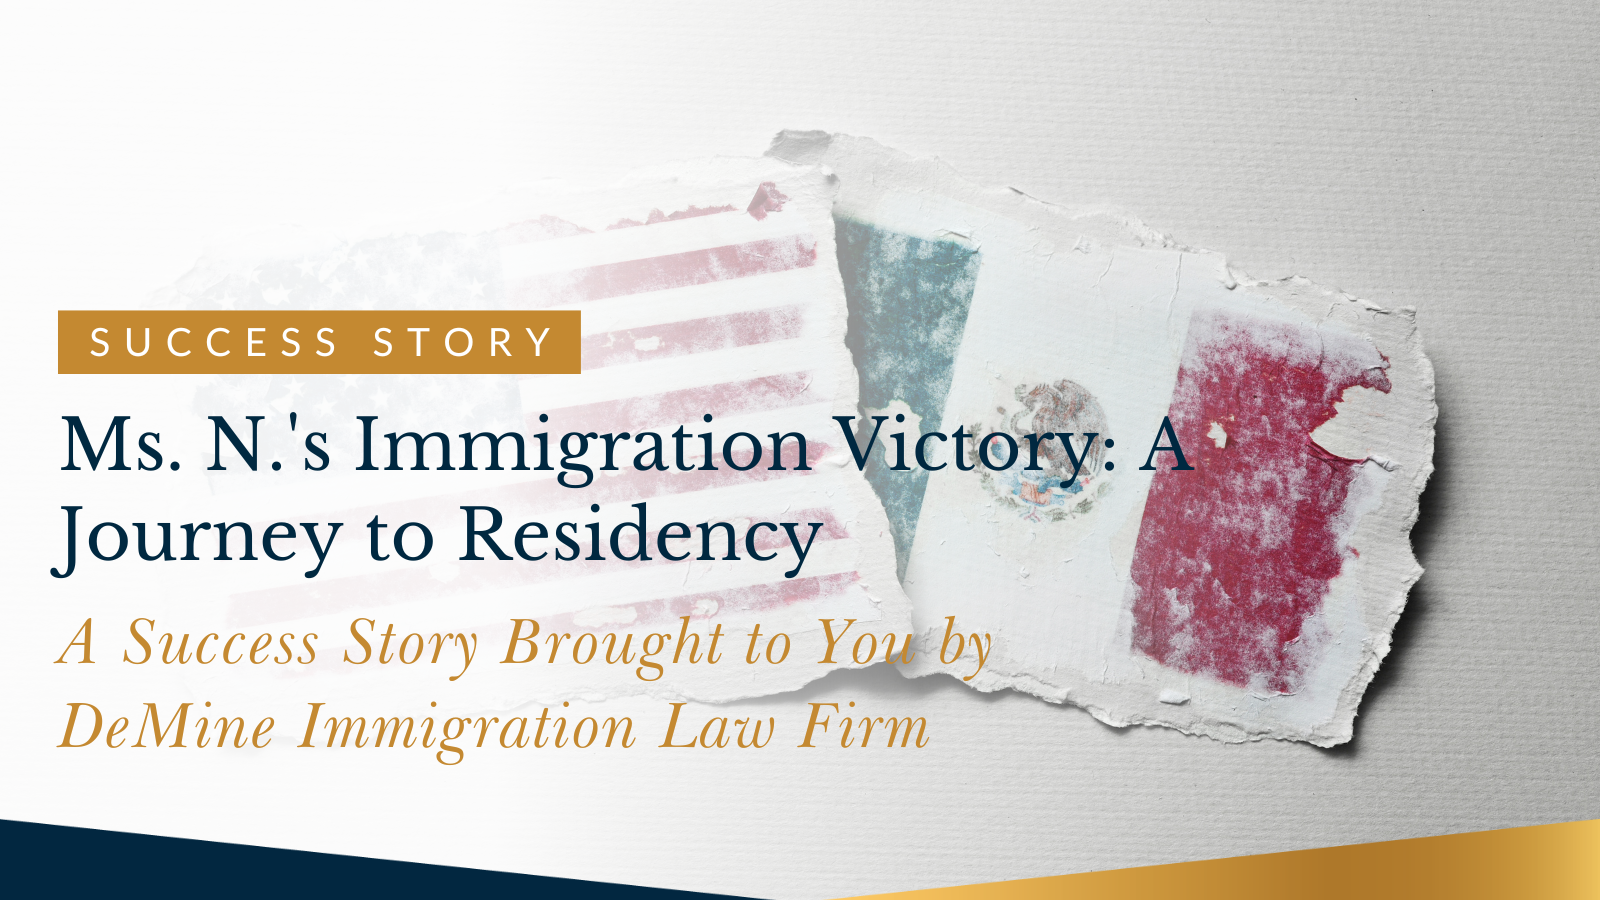 Embark on a compelling journey with Ms. N. as she transforms challenges into triumphs on her path to lawful permanent residency. Discover the power of legal expertise at DeMine Immigration in shaping lives. Explore the full success story now!